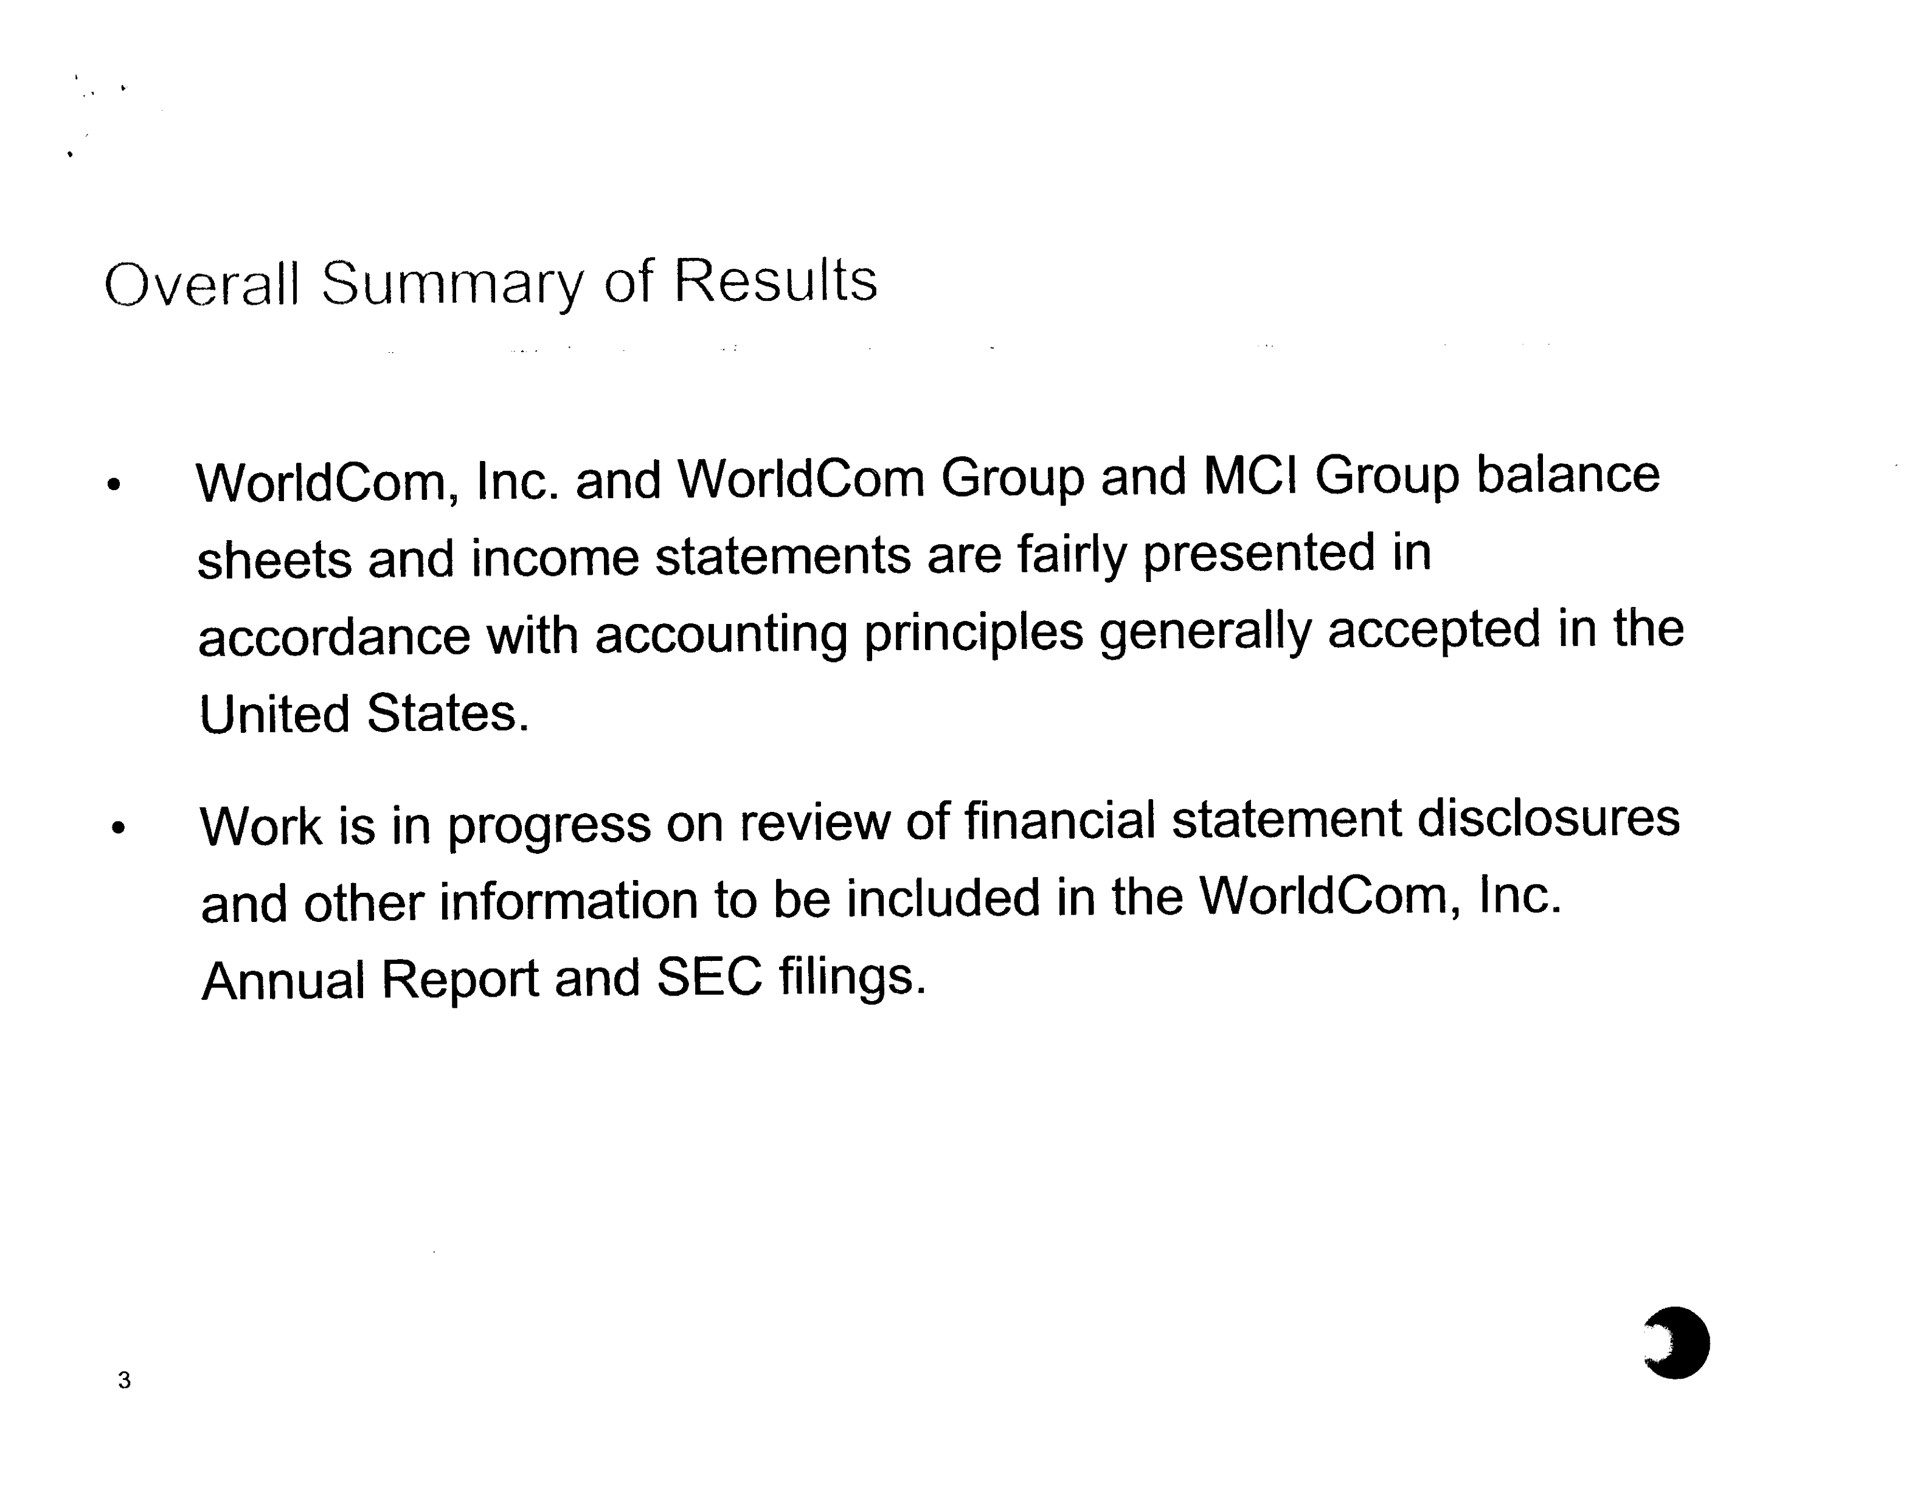 overall summary of results and group and group balance sheets and income statements are fairly presented in accordance with accounting principles generally accepted in the united states work is in progress on review of financial statement disclosures and other information to be included in the annual report and sec filings | Arthur Andersen